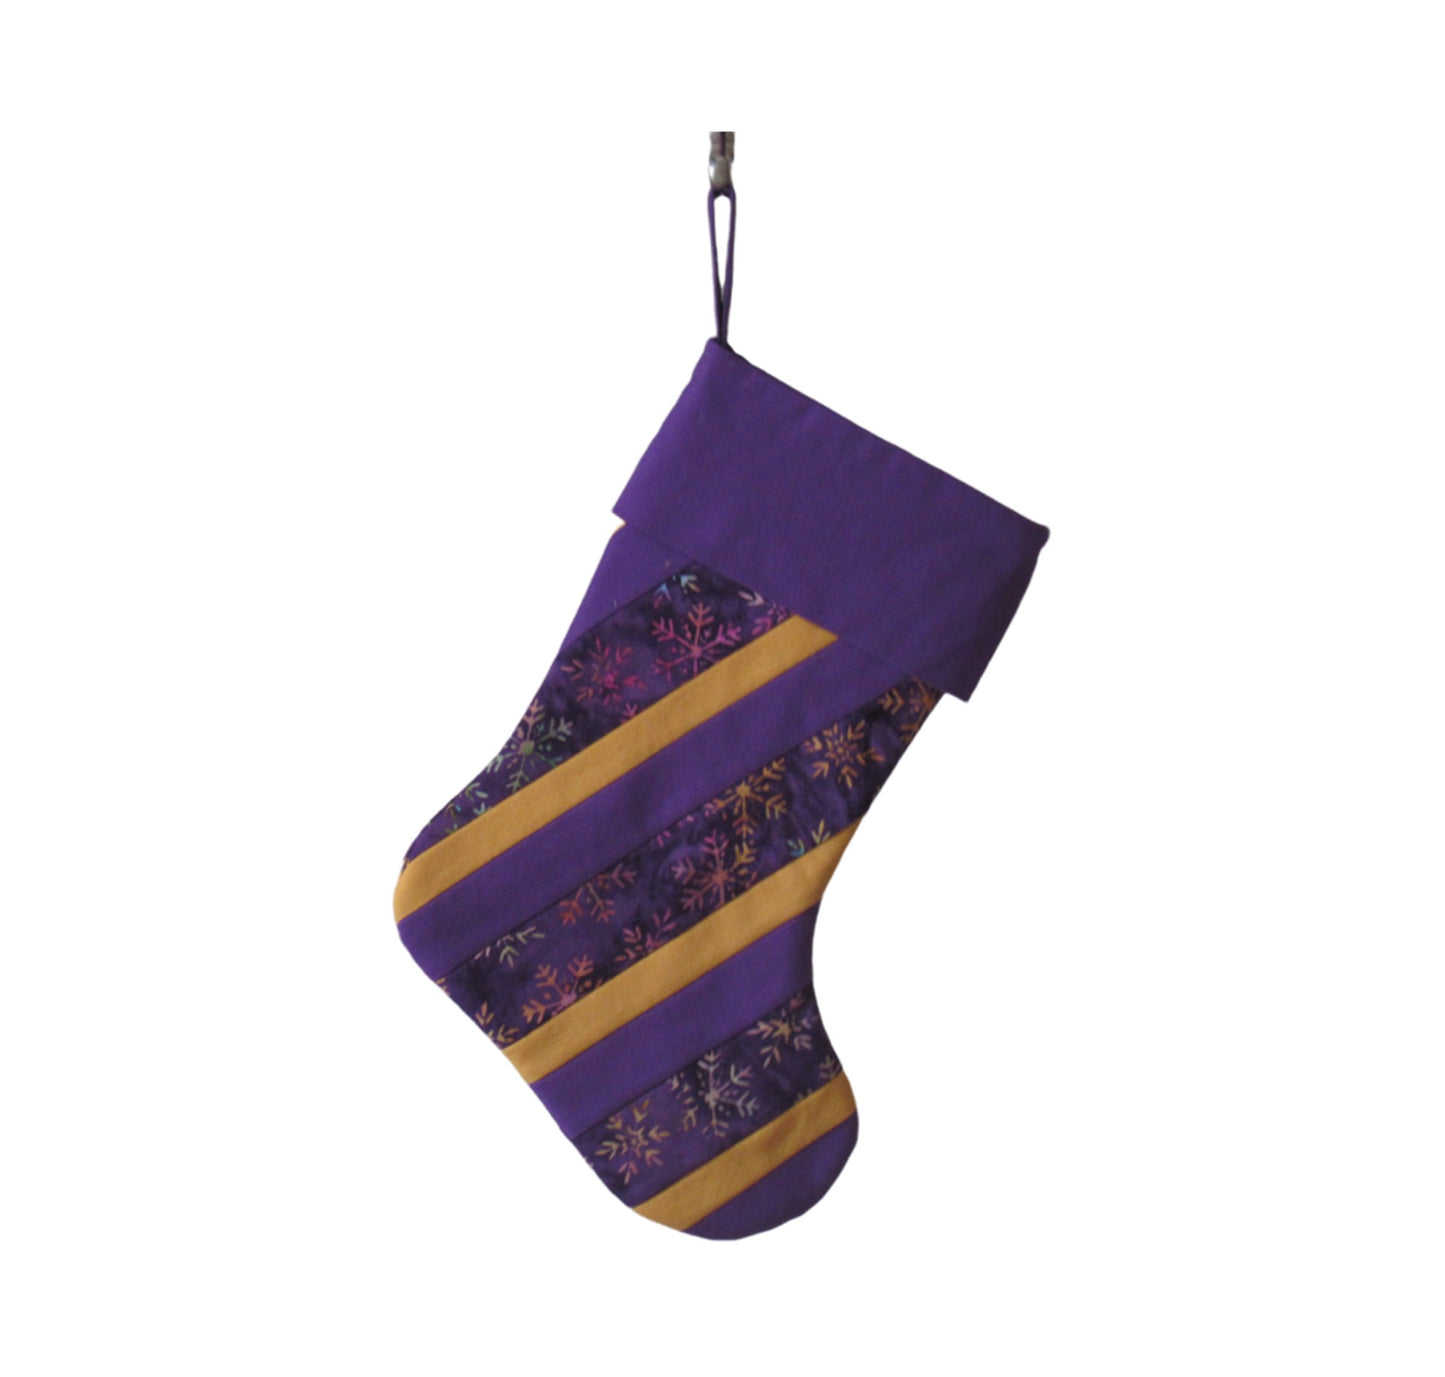 It's Christmas in July! (4 days only) Quilted Christmas Stocking - Handmade Christmas Stocking - Country Christmas Stocking - Purple and Yellow Christmas Stocking - Stocking 06